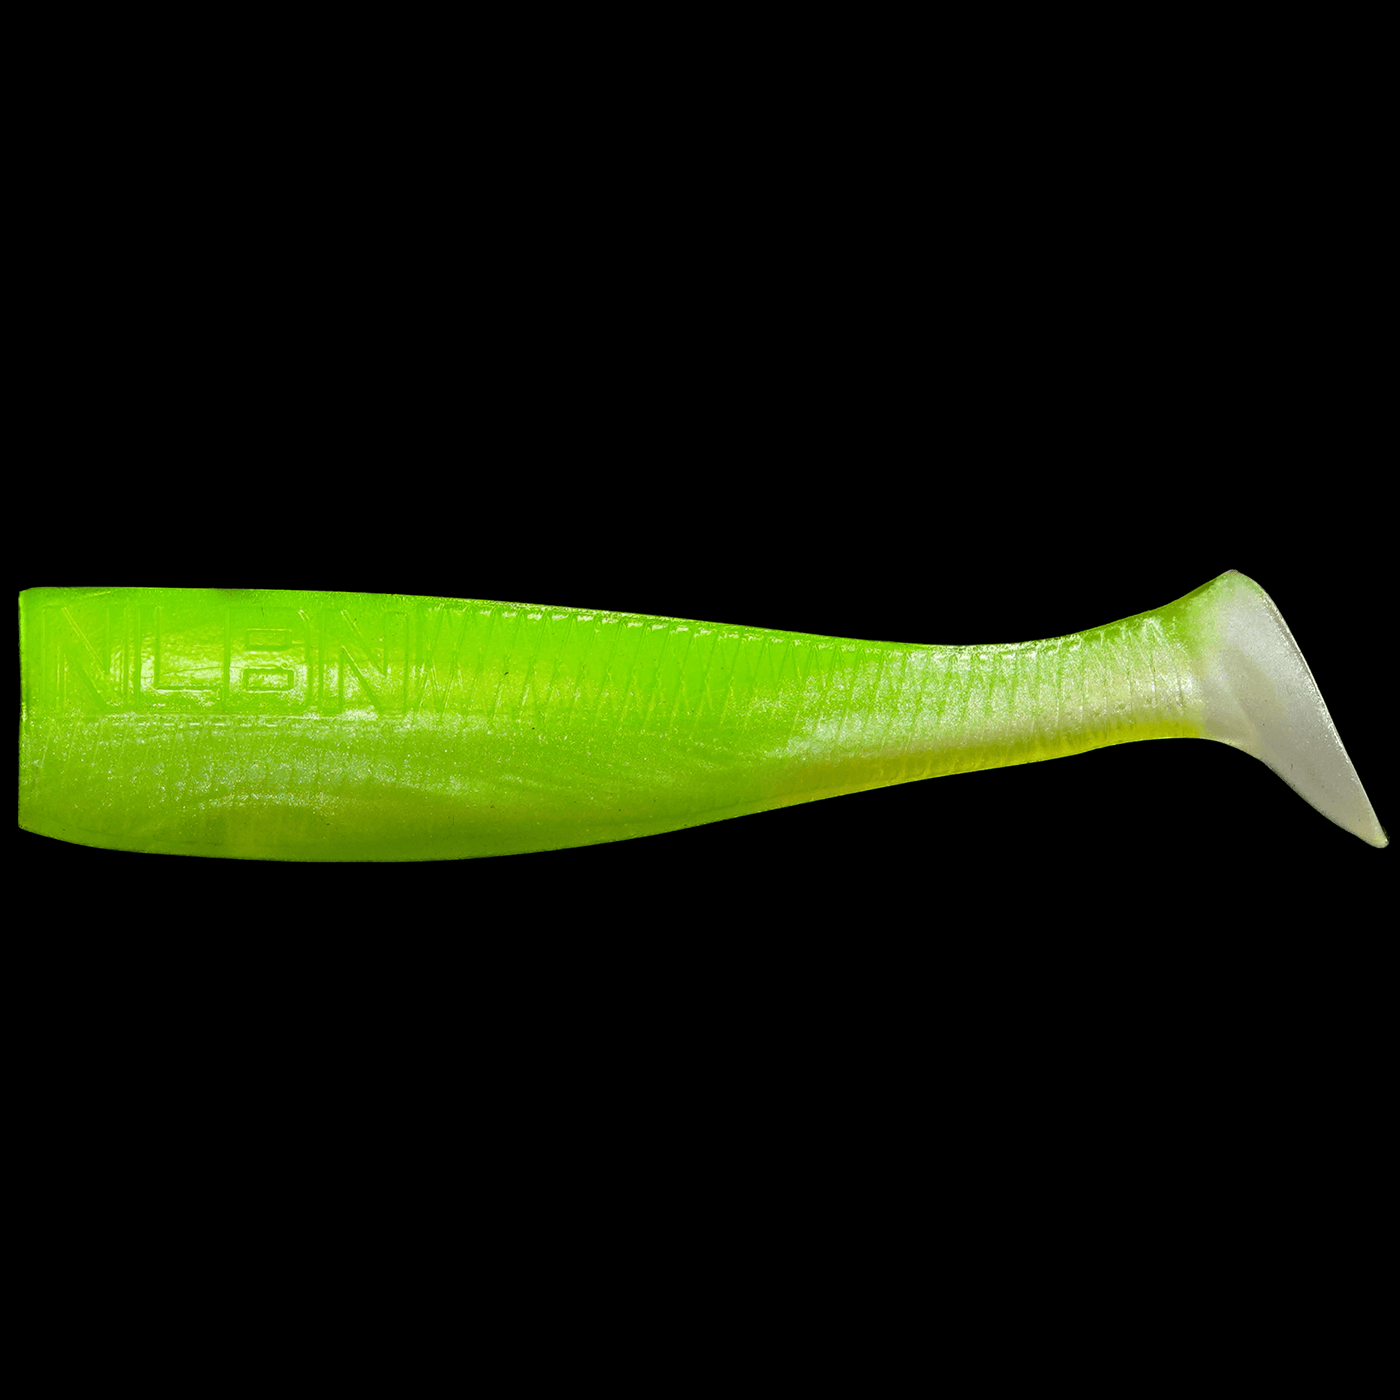 5" Paddle Tail - No Live Bait Needed Swimbait5 5" Paddle Tail 5